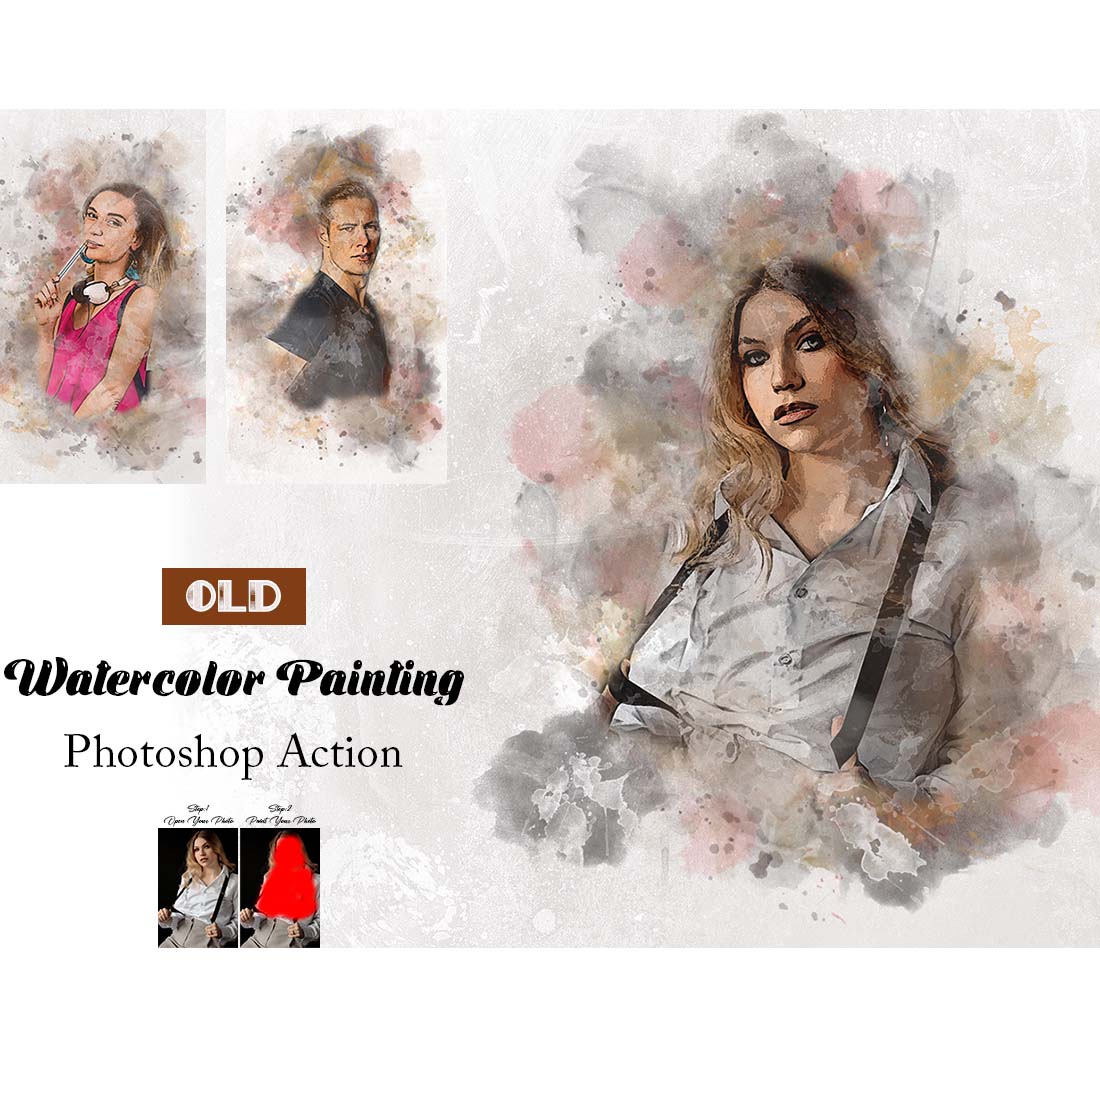 Old Watercolor Painting Photoshop Action cover image.